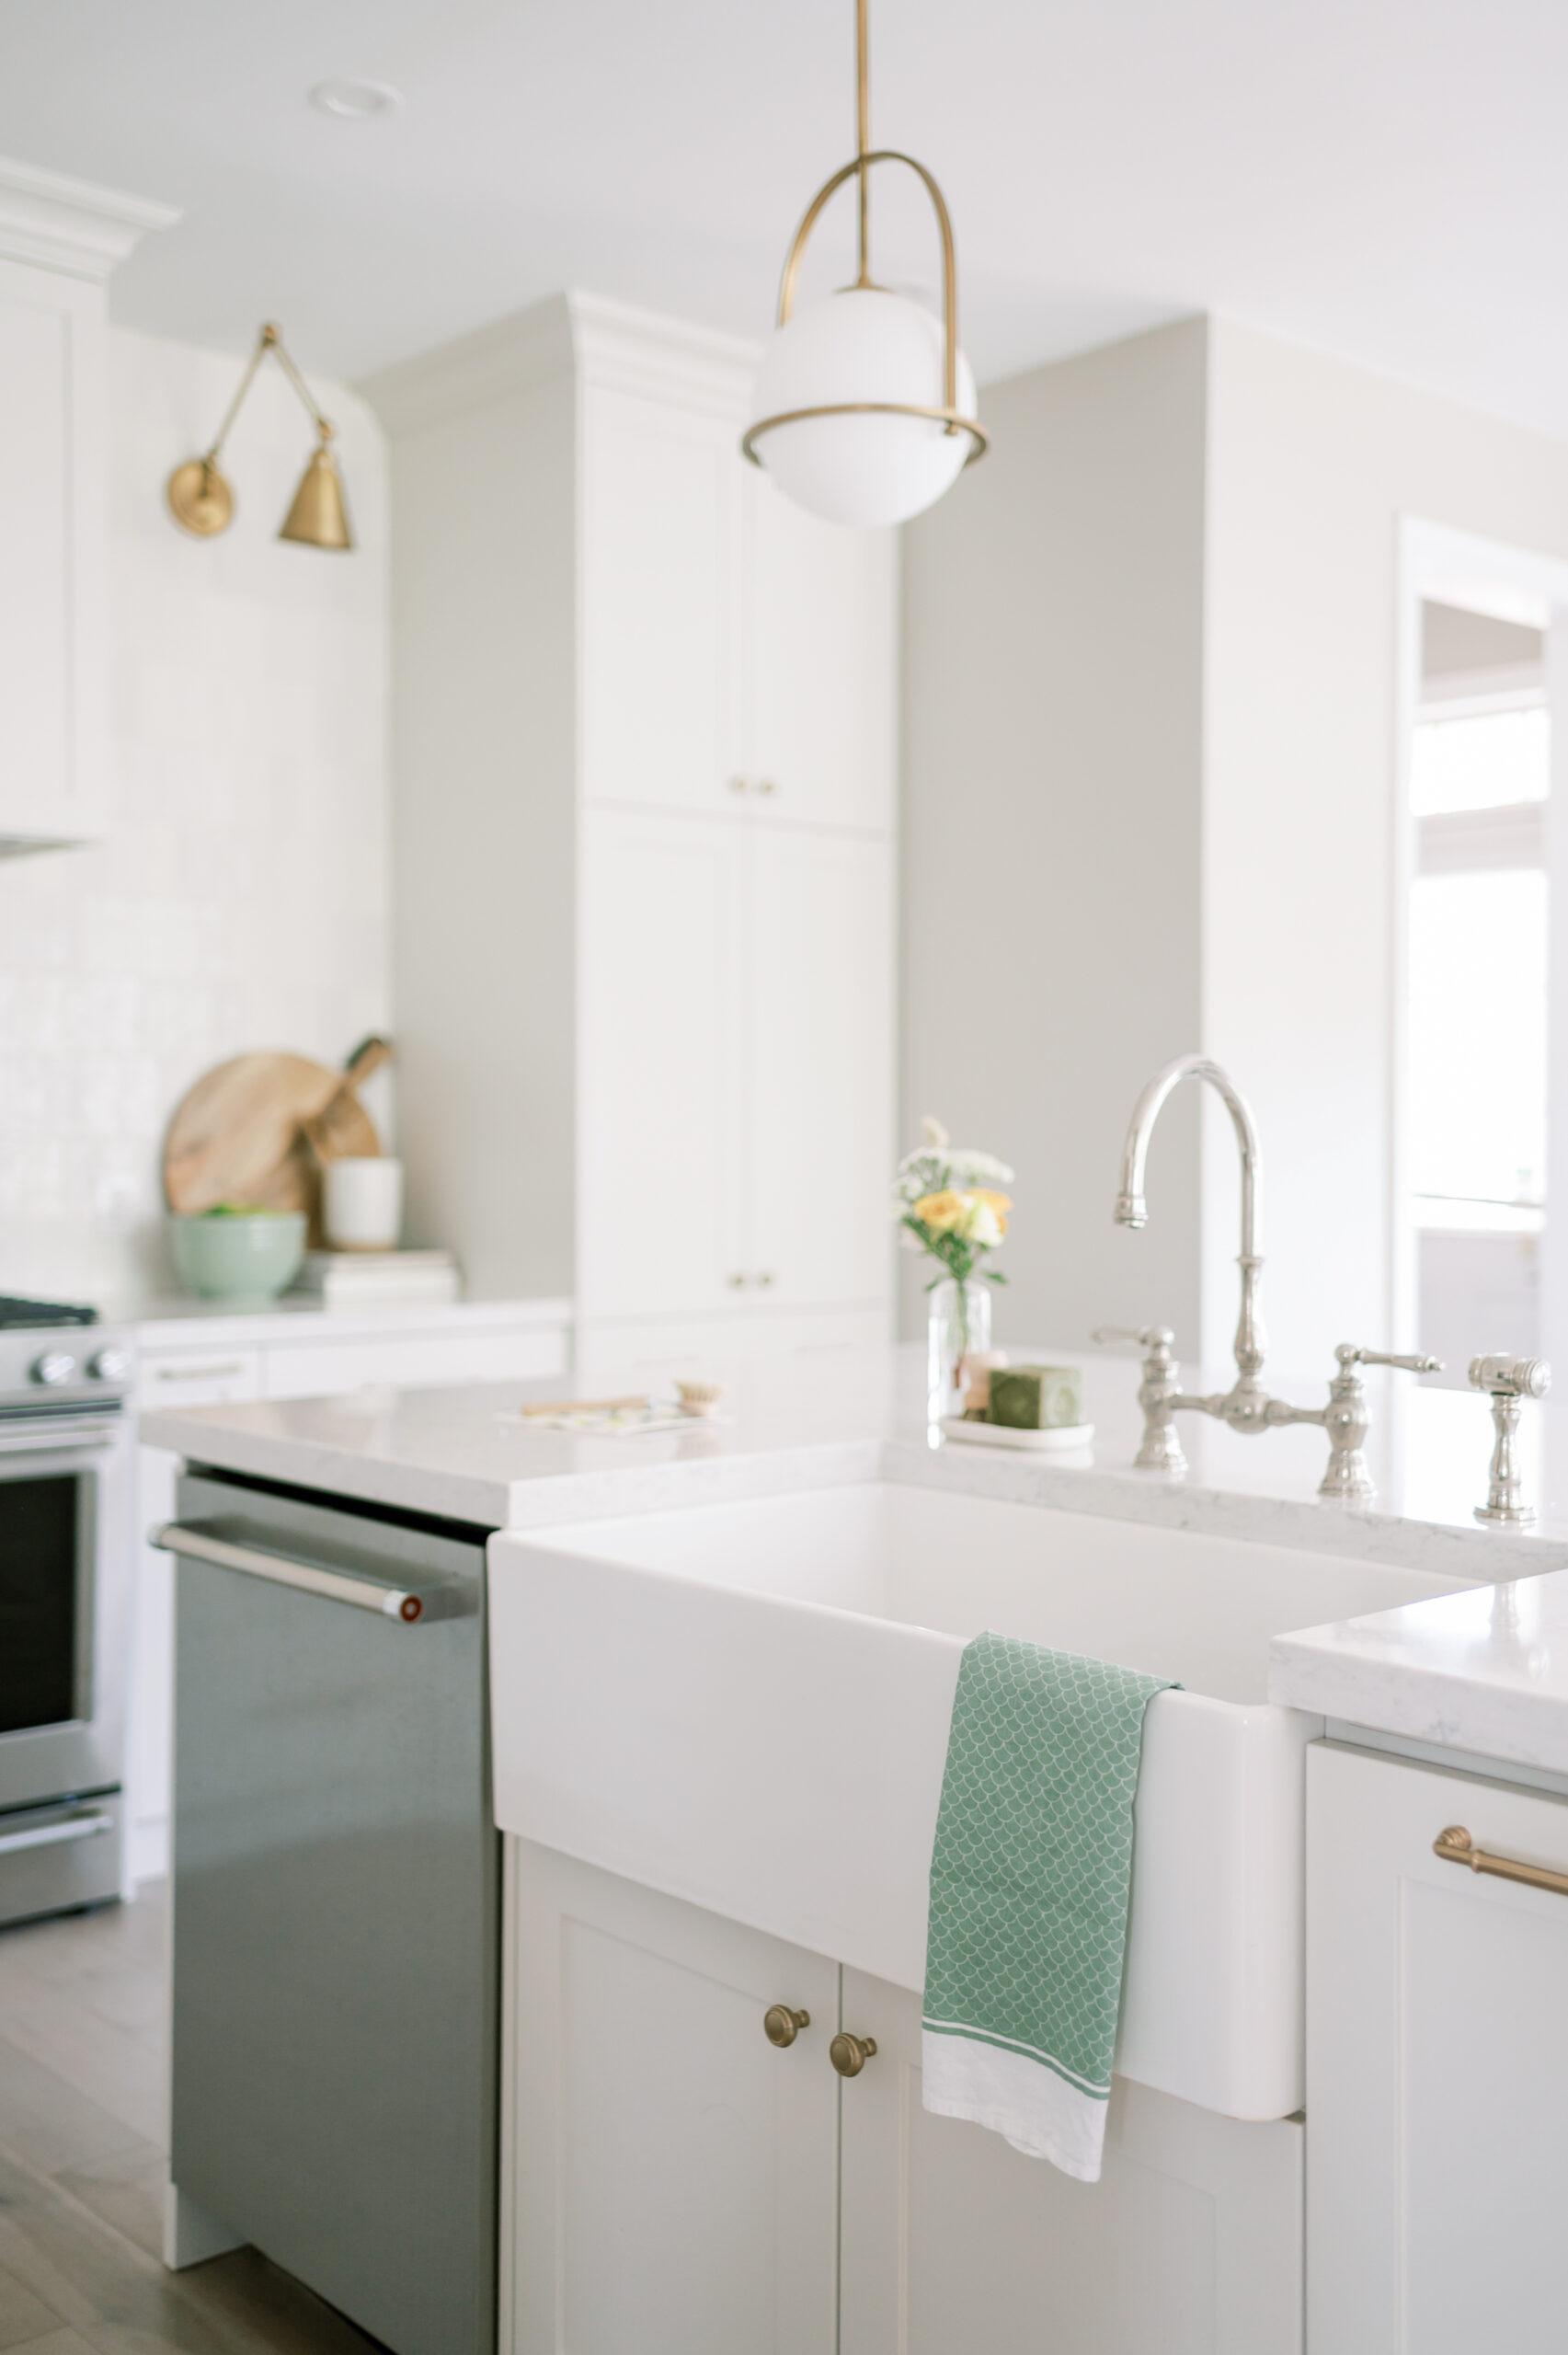 A bright, white modern kitchen featuring a farmhouse sink with a green towel, white cabinets, and a hanging pendant light. stainless steel appliances and marble countertops are visible.